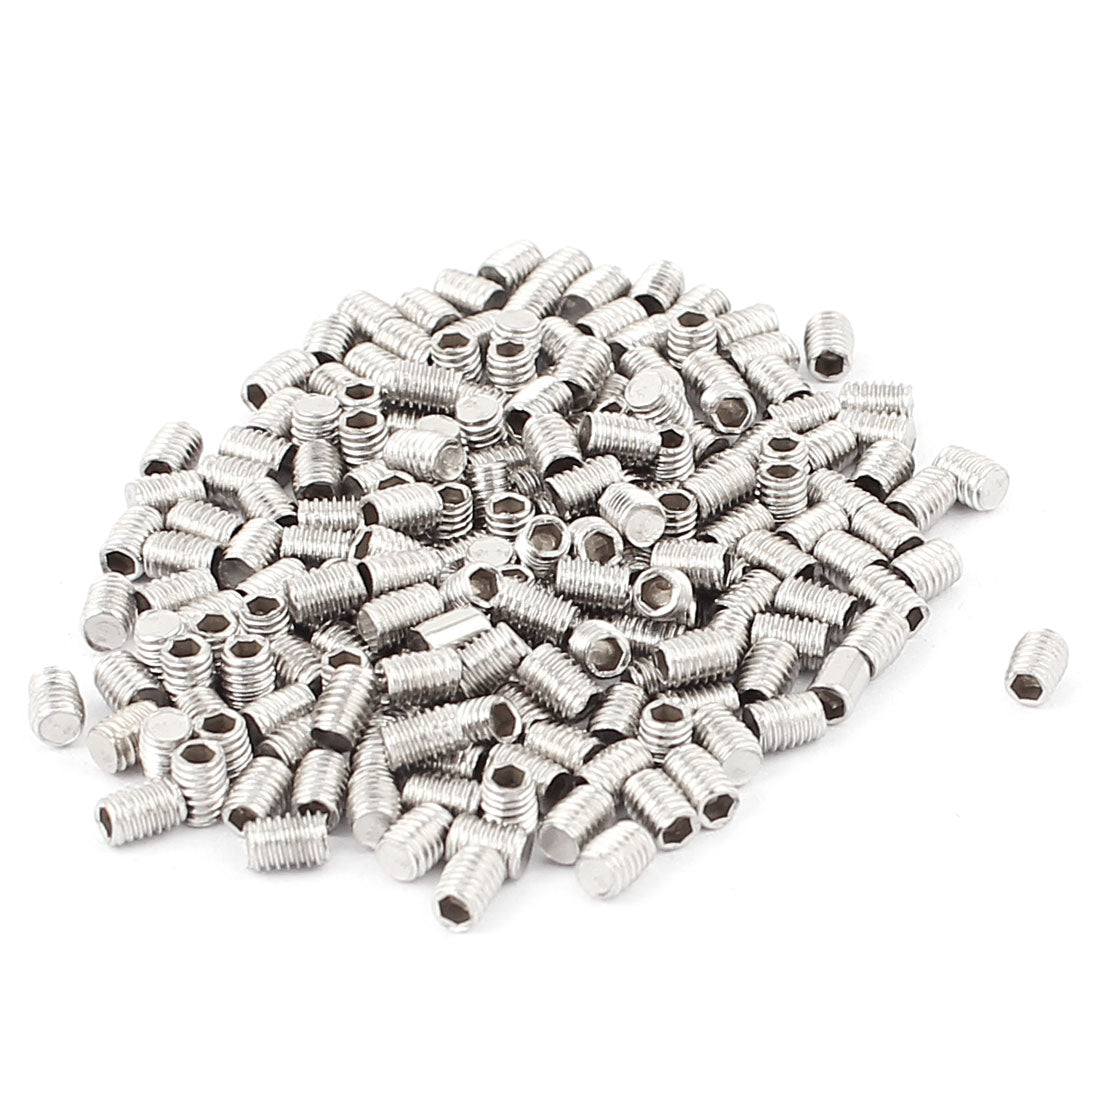 uxcell Uxcell 200pcs Stainless Steel Flat Point Hex Socket Grub Screws M3x4mm